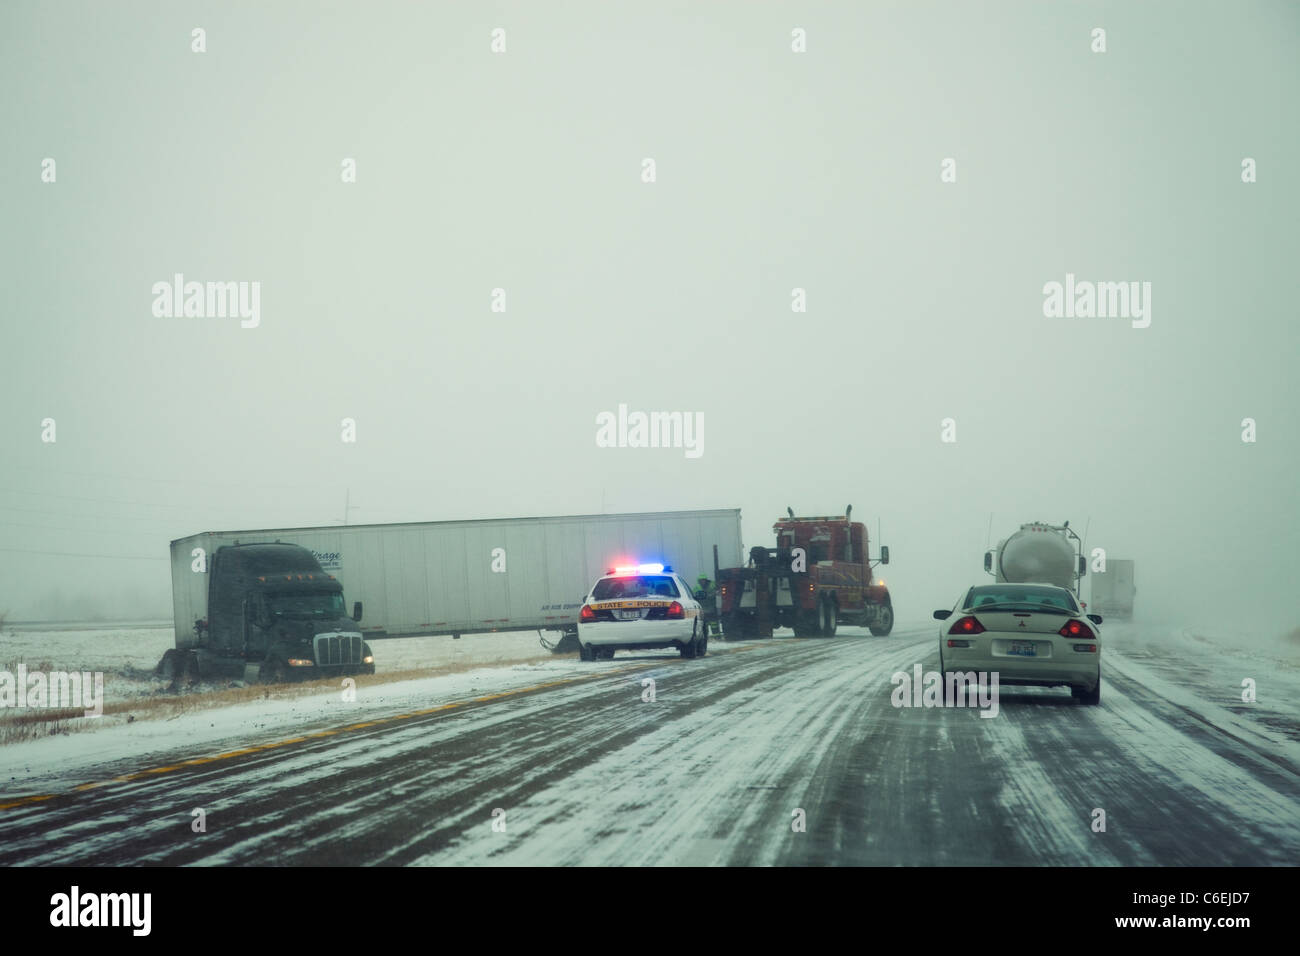 USA, Illinois, Springfield, Semi truck accident on highway during storm Stock Photo